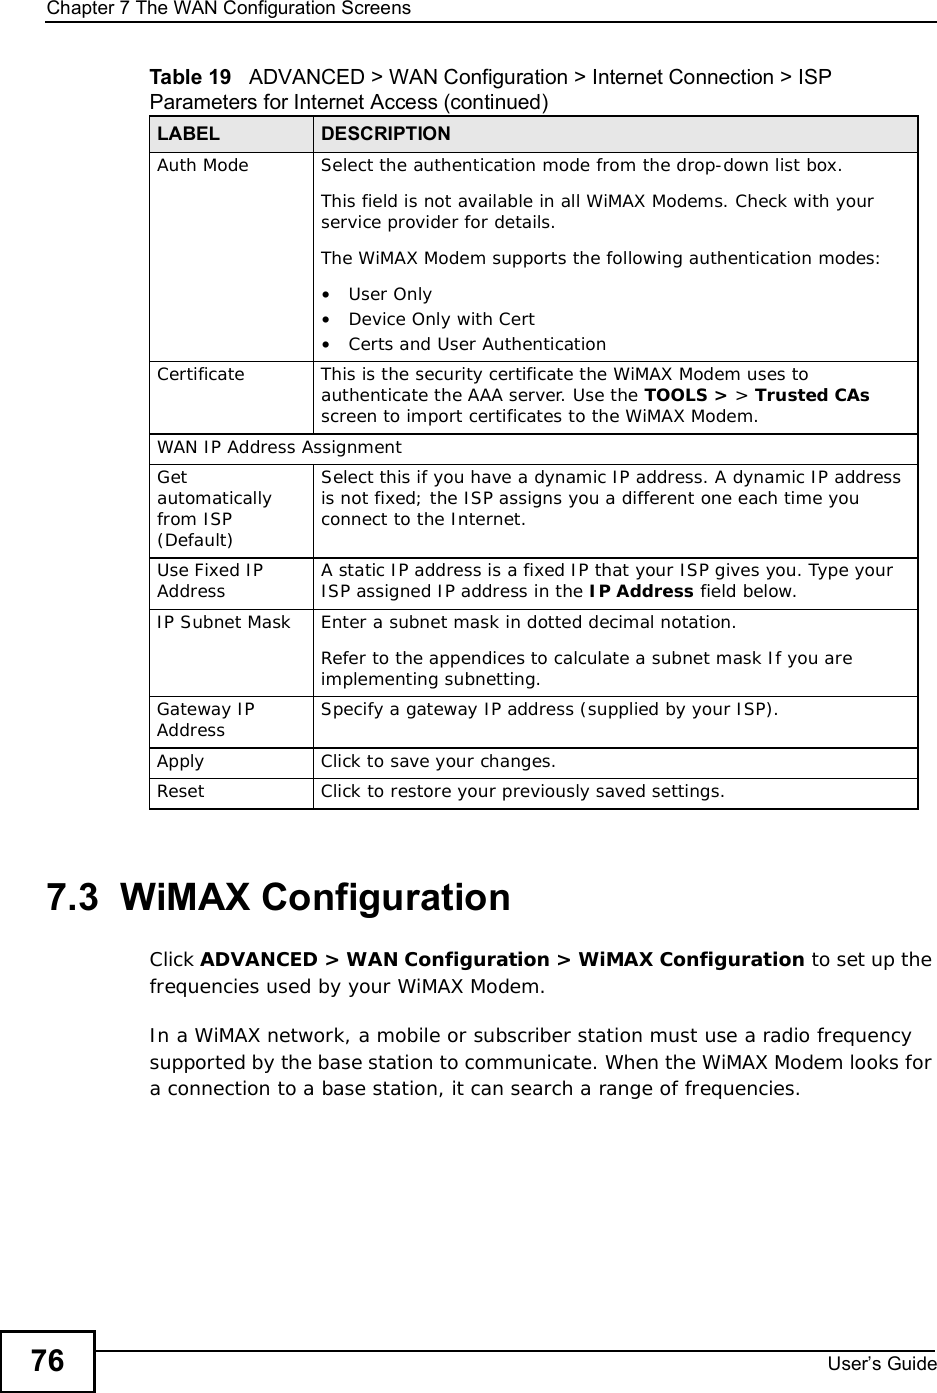 Chapter 7The WAN Configuration ScreensUser s Guide767.3  WiMAX ConfigurationClick ADVANCED &gt; WAN Configuration &gt; WiMAX Configuration to set up the frequencies used by your WiMAX Modem.In a WiMAX network, a mobile or subscriber station must use a radio frequency supported by the base station to communicate. When the WiMAX Modem looks for a connection to a base station, it can search a range of frequencies.Auth ModeSelect the authentication mode from the drop-down list box.This field is not available in all WiMAX Modems. Check with your service provider for details.The WiMAX Modem supports the following authentication modes:•User Only•Device Only with Cert•Certs and User AuthenticationCertificateThis is the security certificate the WiMAX Modem uses to authenticate the AAA server. Use the TOOLS &gt; &gt; Trusted CAsscreen to import certificates to the WiMAX Modem.WAN IP Address AssignmentGetautomatically from ISP (Default)Select this if you have a dynamic IP address. A dynamic IP address is not fixed; the ISP assigns you a different one each time you connect to the Internet. Use Fixed IP Address A static IP address is a fixed IP that your ISP gives you. Type your ISP assigned IP address in the IP Address field below. IP Subnet MaskEnter a subnet mask in dotted decimal notation. Refer to the appendicesto calculate a subnet mask If you are implementing subnetting.Gateway IP Address Specify a gateway IP address (supplied by your ISP).ApplyClick to save your changes.ResetClick to restore your previously saved settings.Table 19   ADVANCED &gt; WAN Configuration &gt; Internet Connection &gt; ISP Parameters for Internet Access (continued)LABEL DESCRIPTION